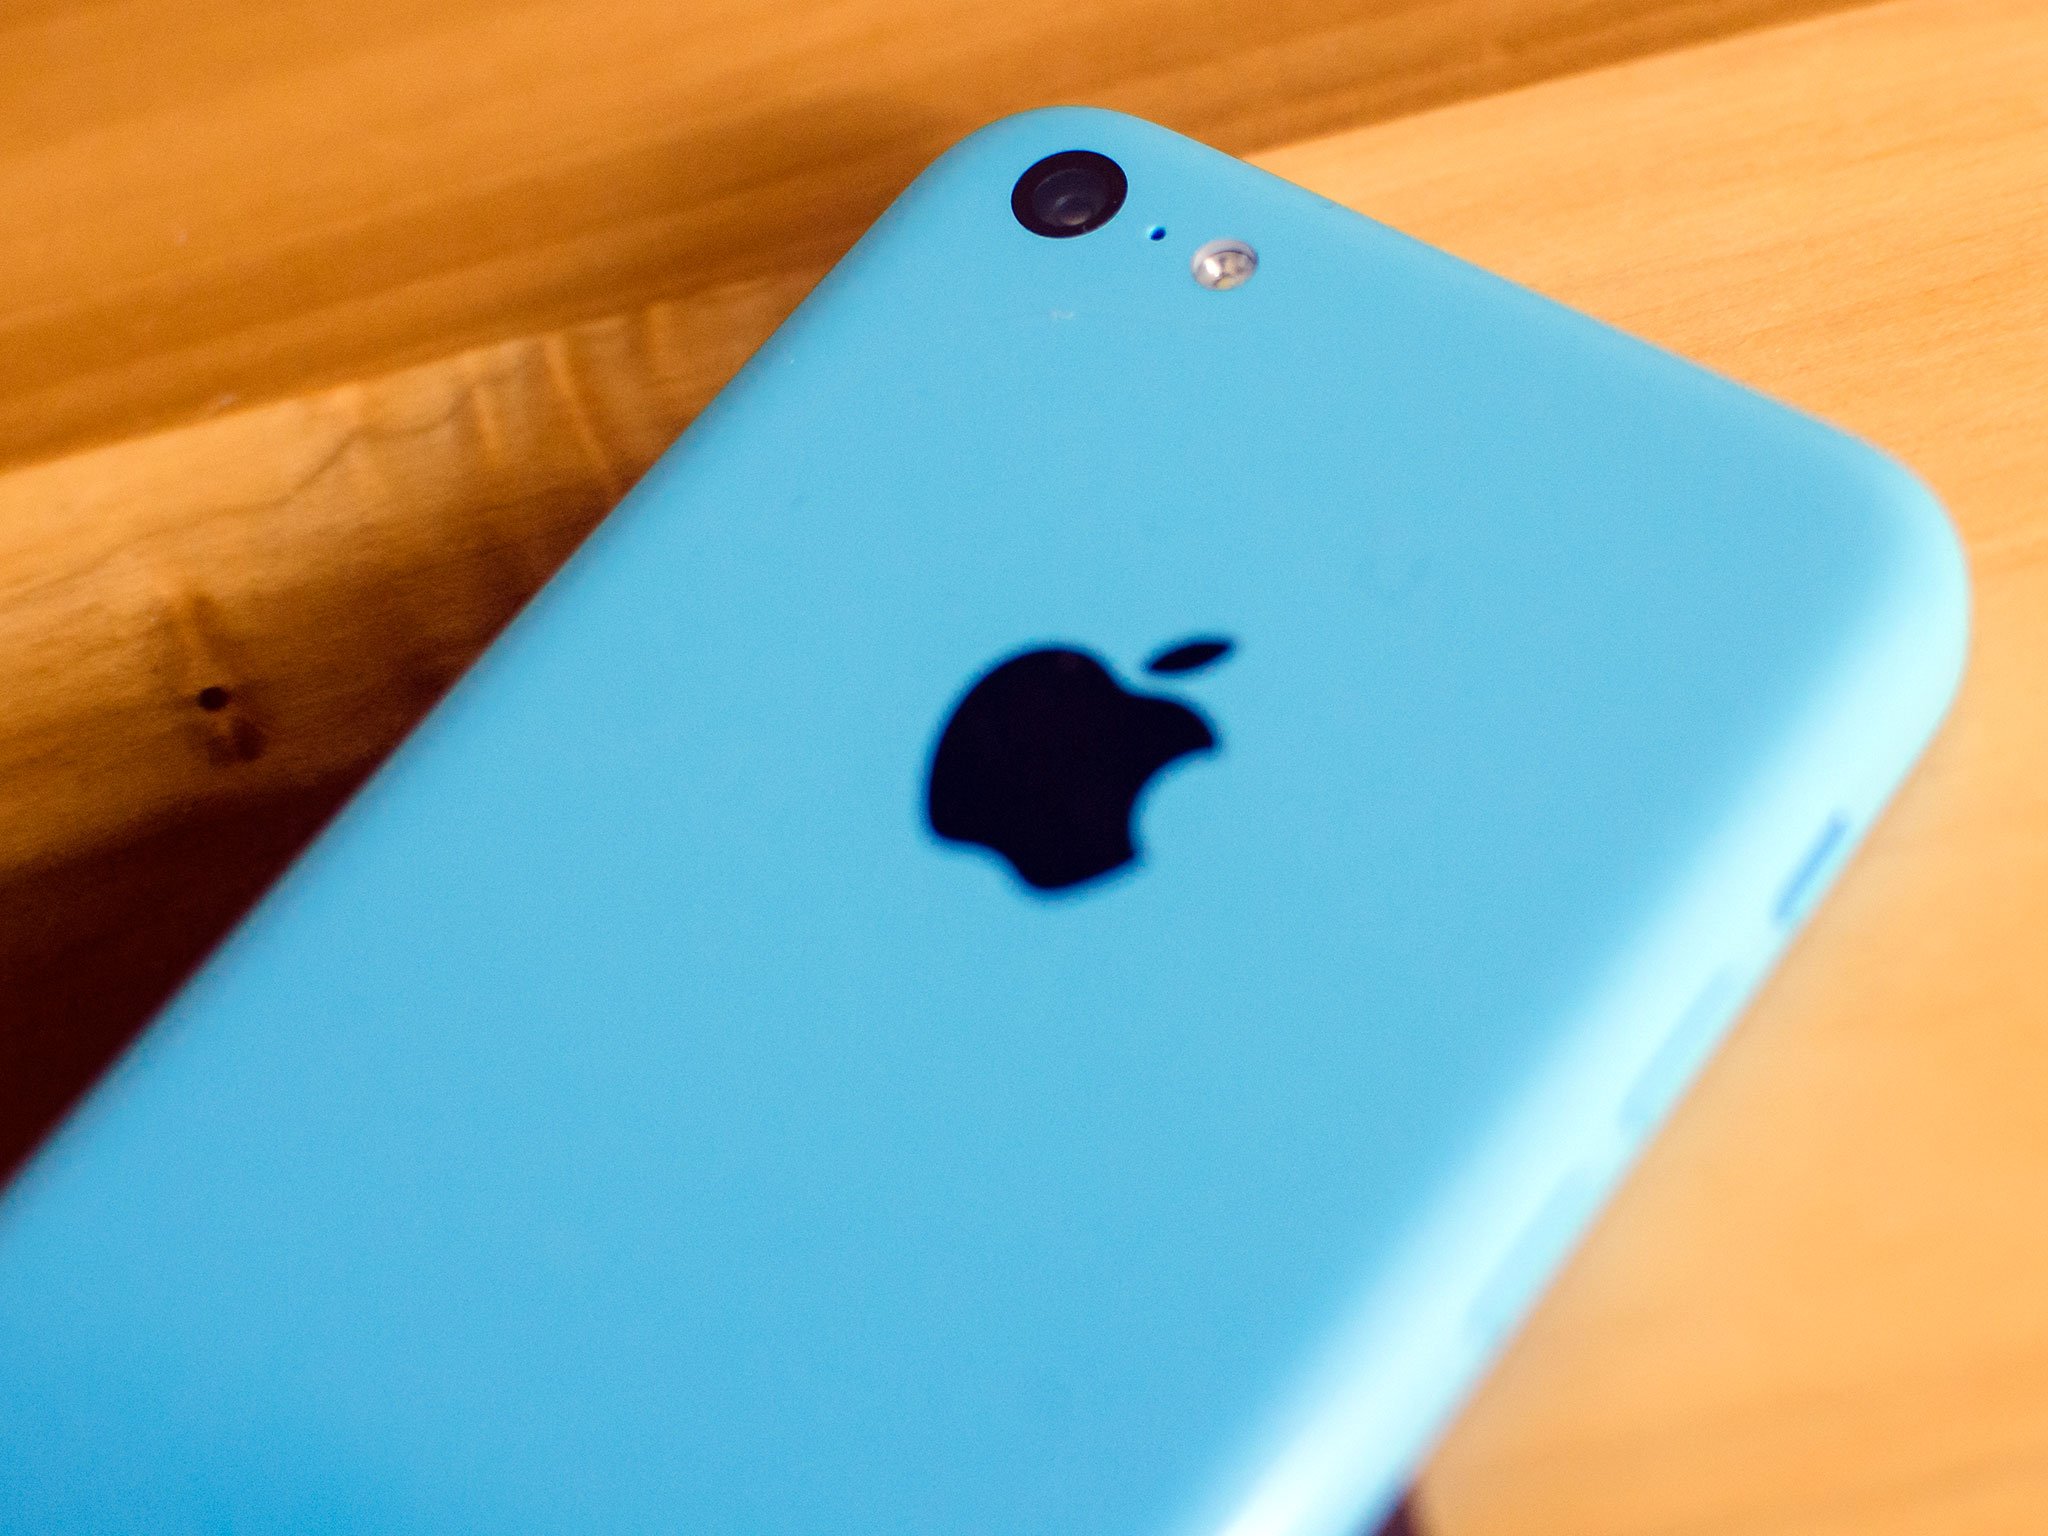 How to replace the rear camera in an iPhone 5c